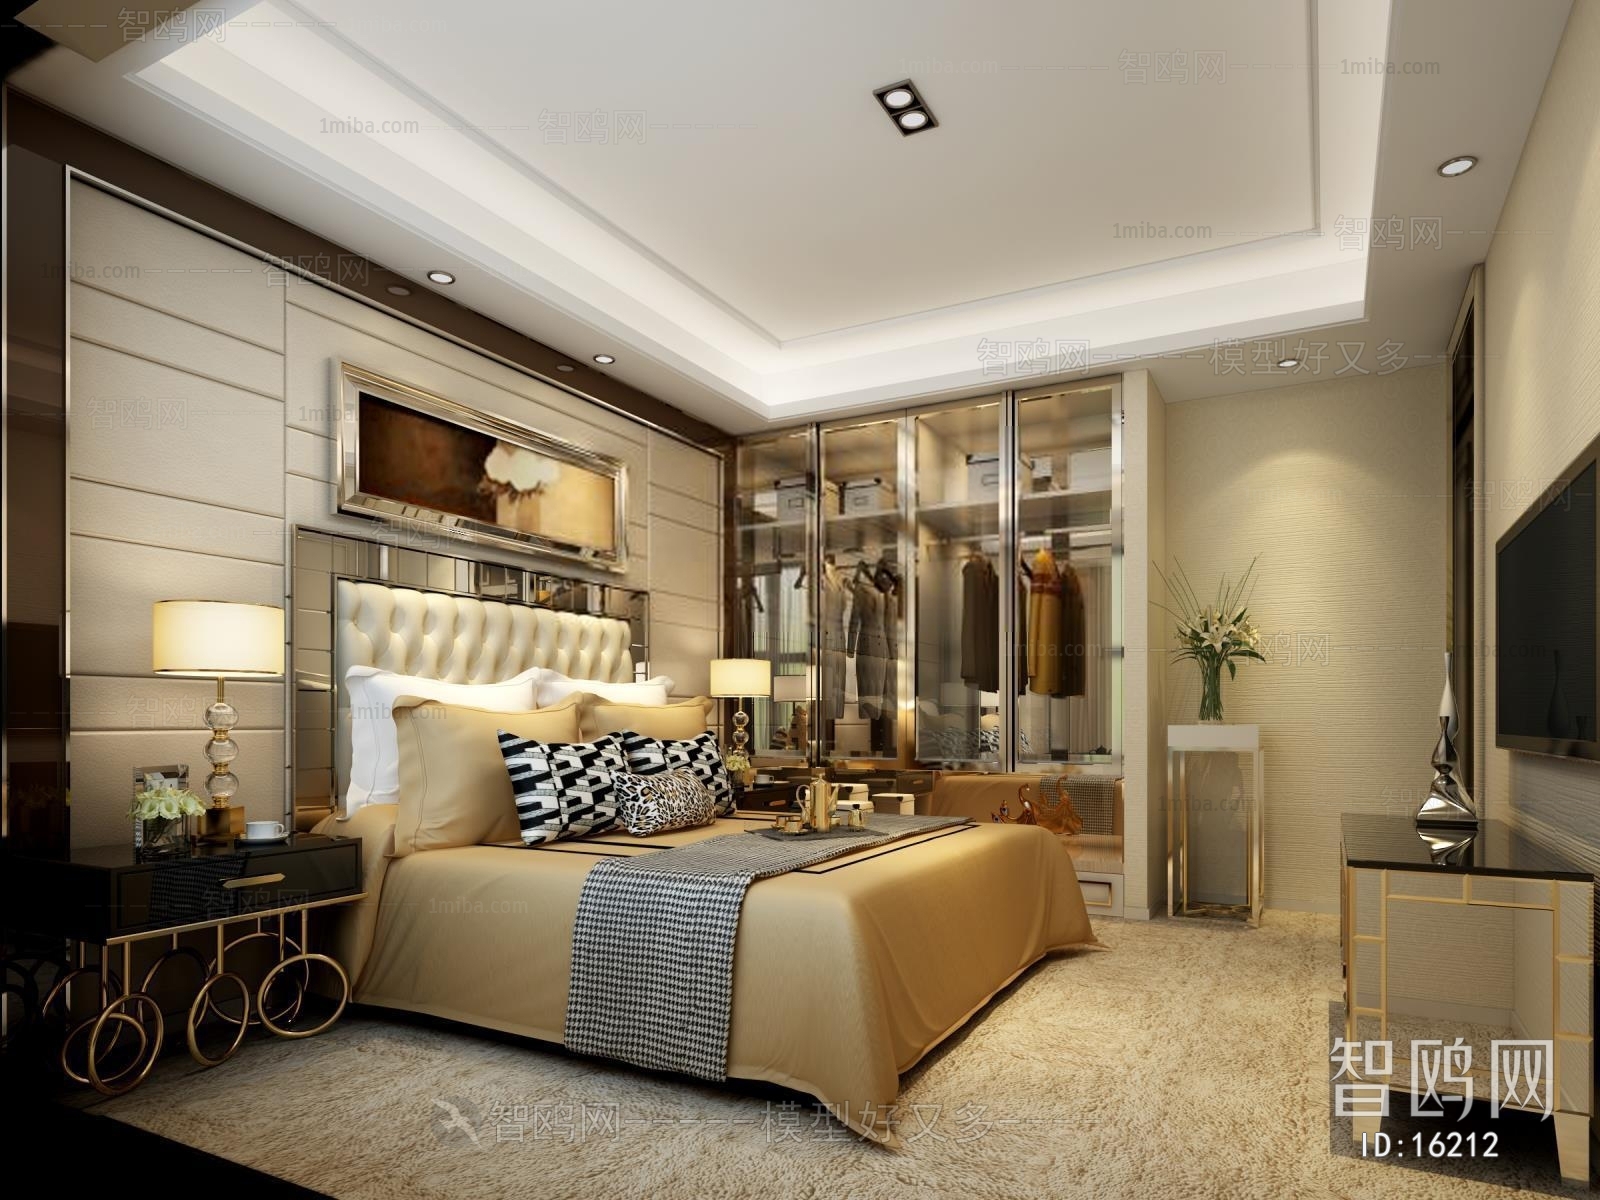 Modern New Classical Style Bedroom